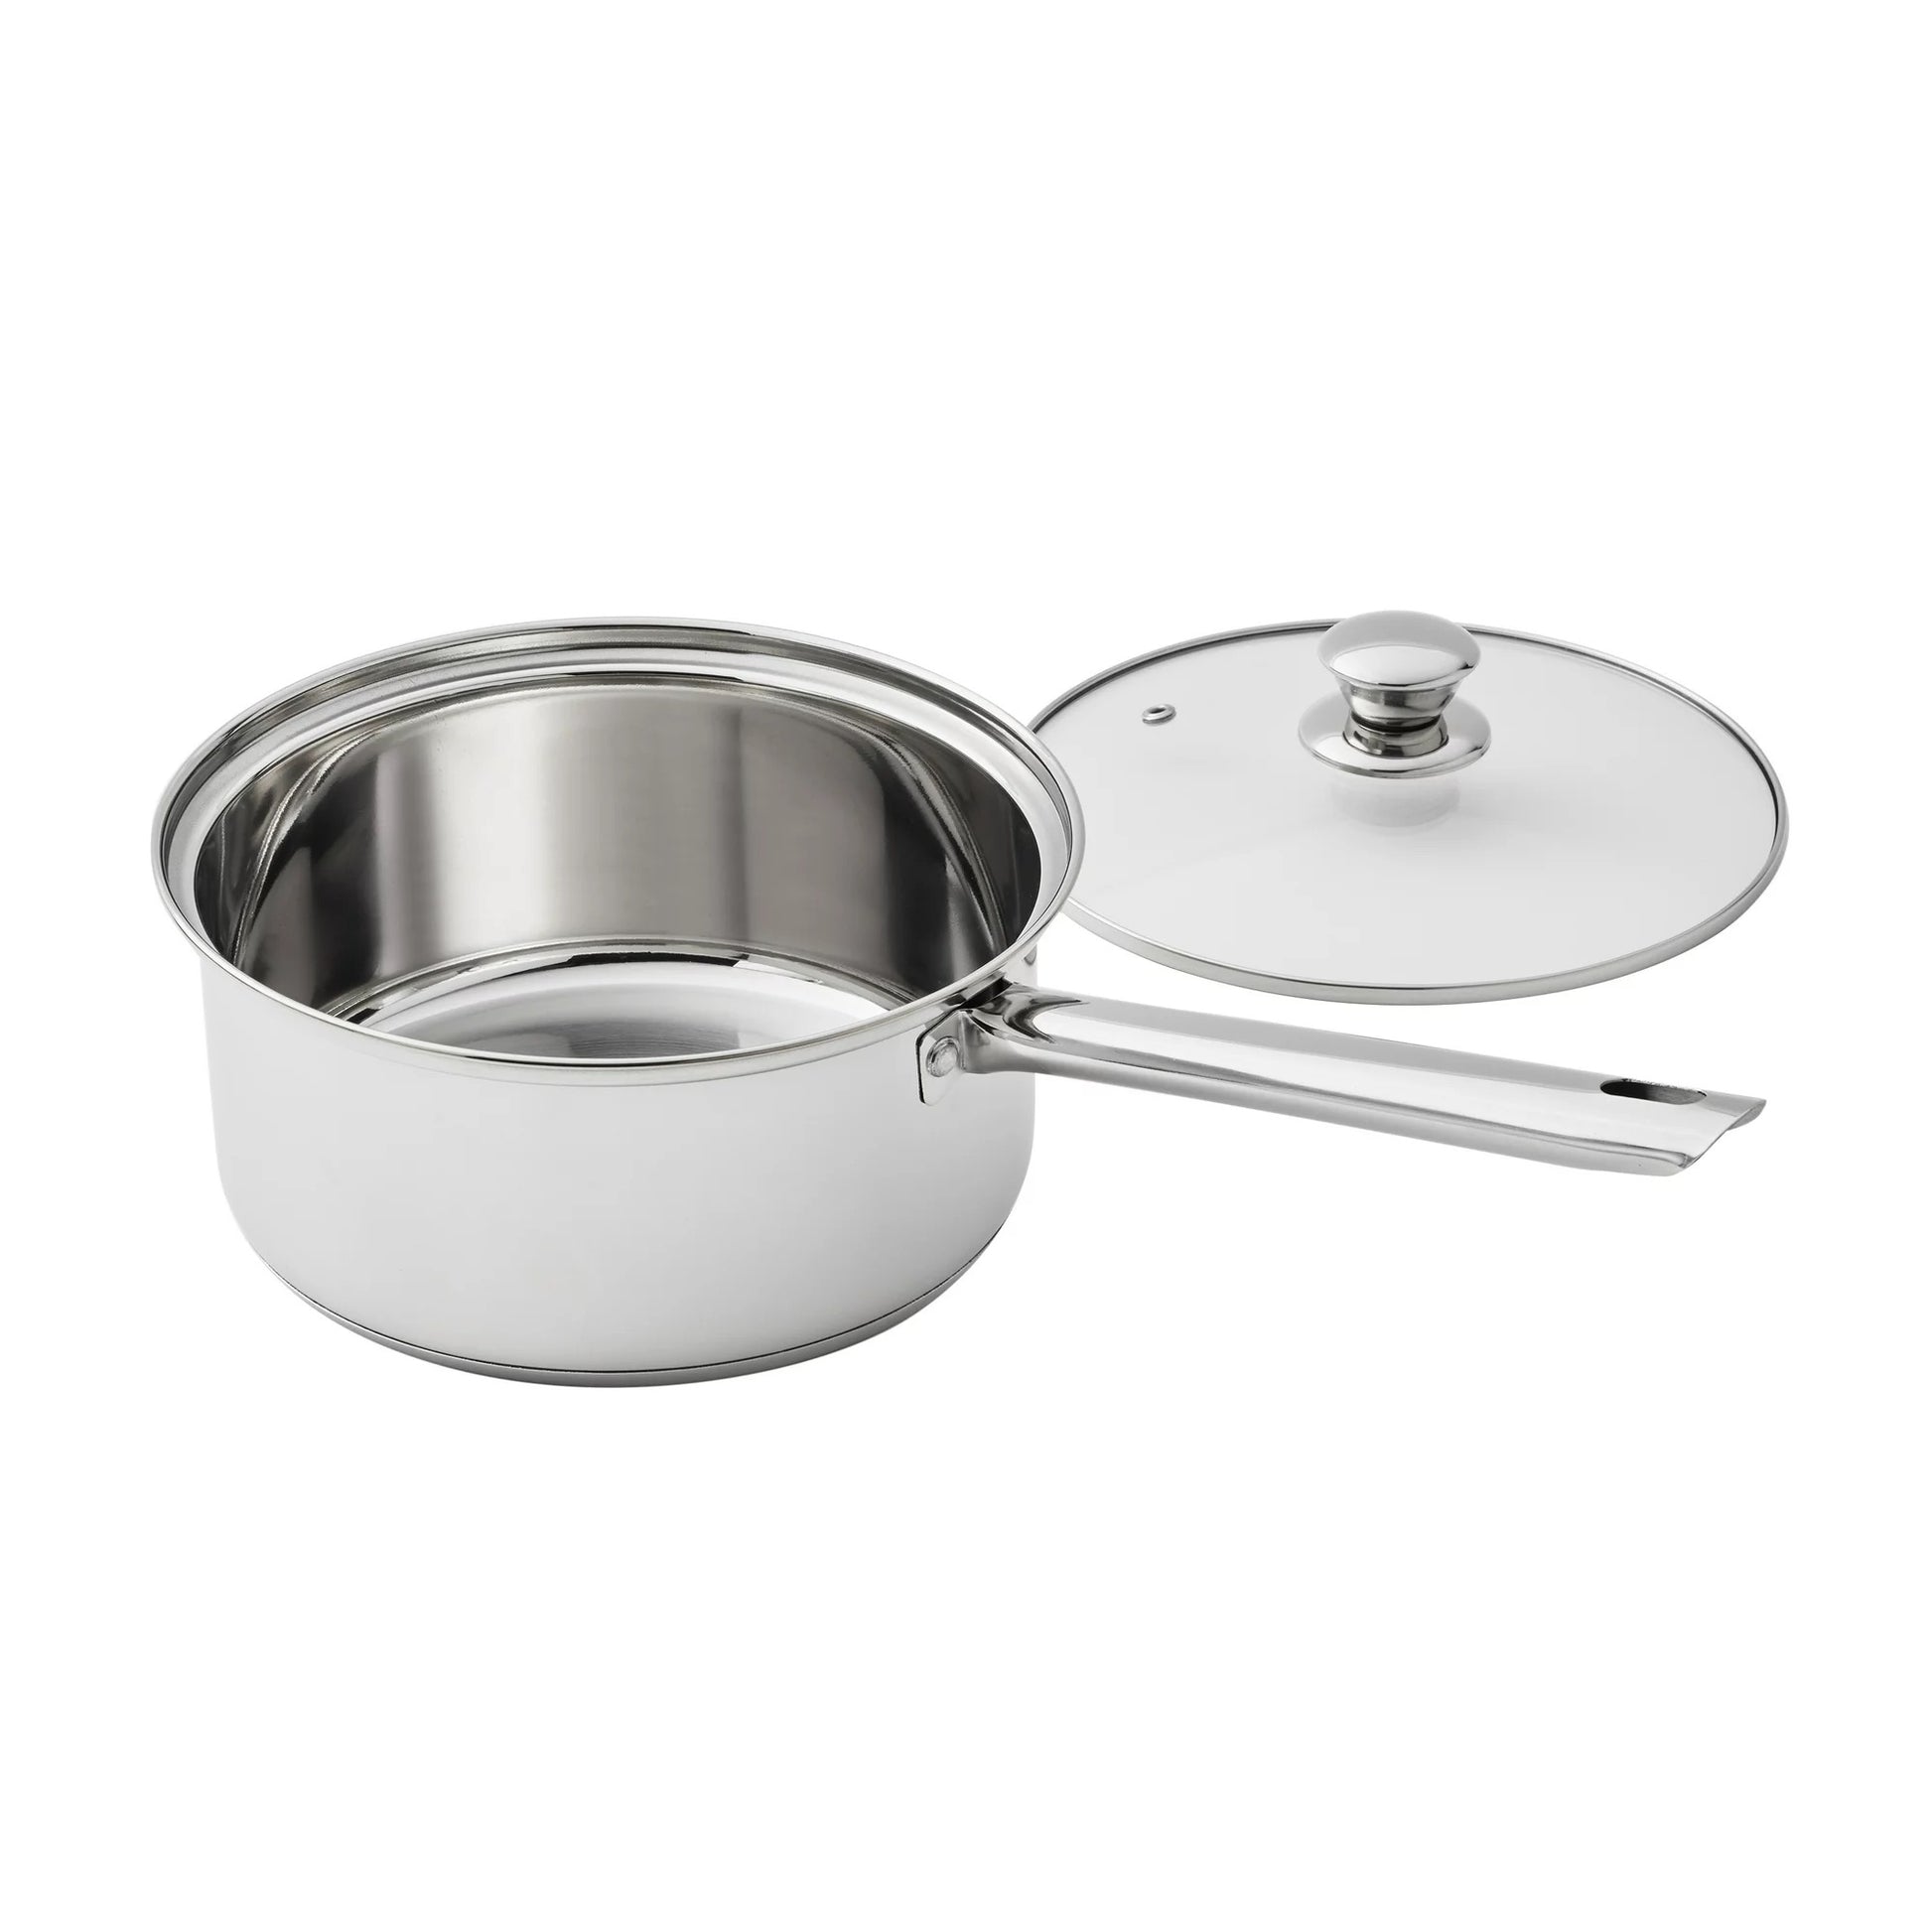 Mainstays Stainless Steel Cookware and Kitchen Combo Set